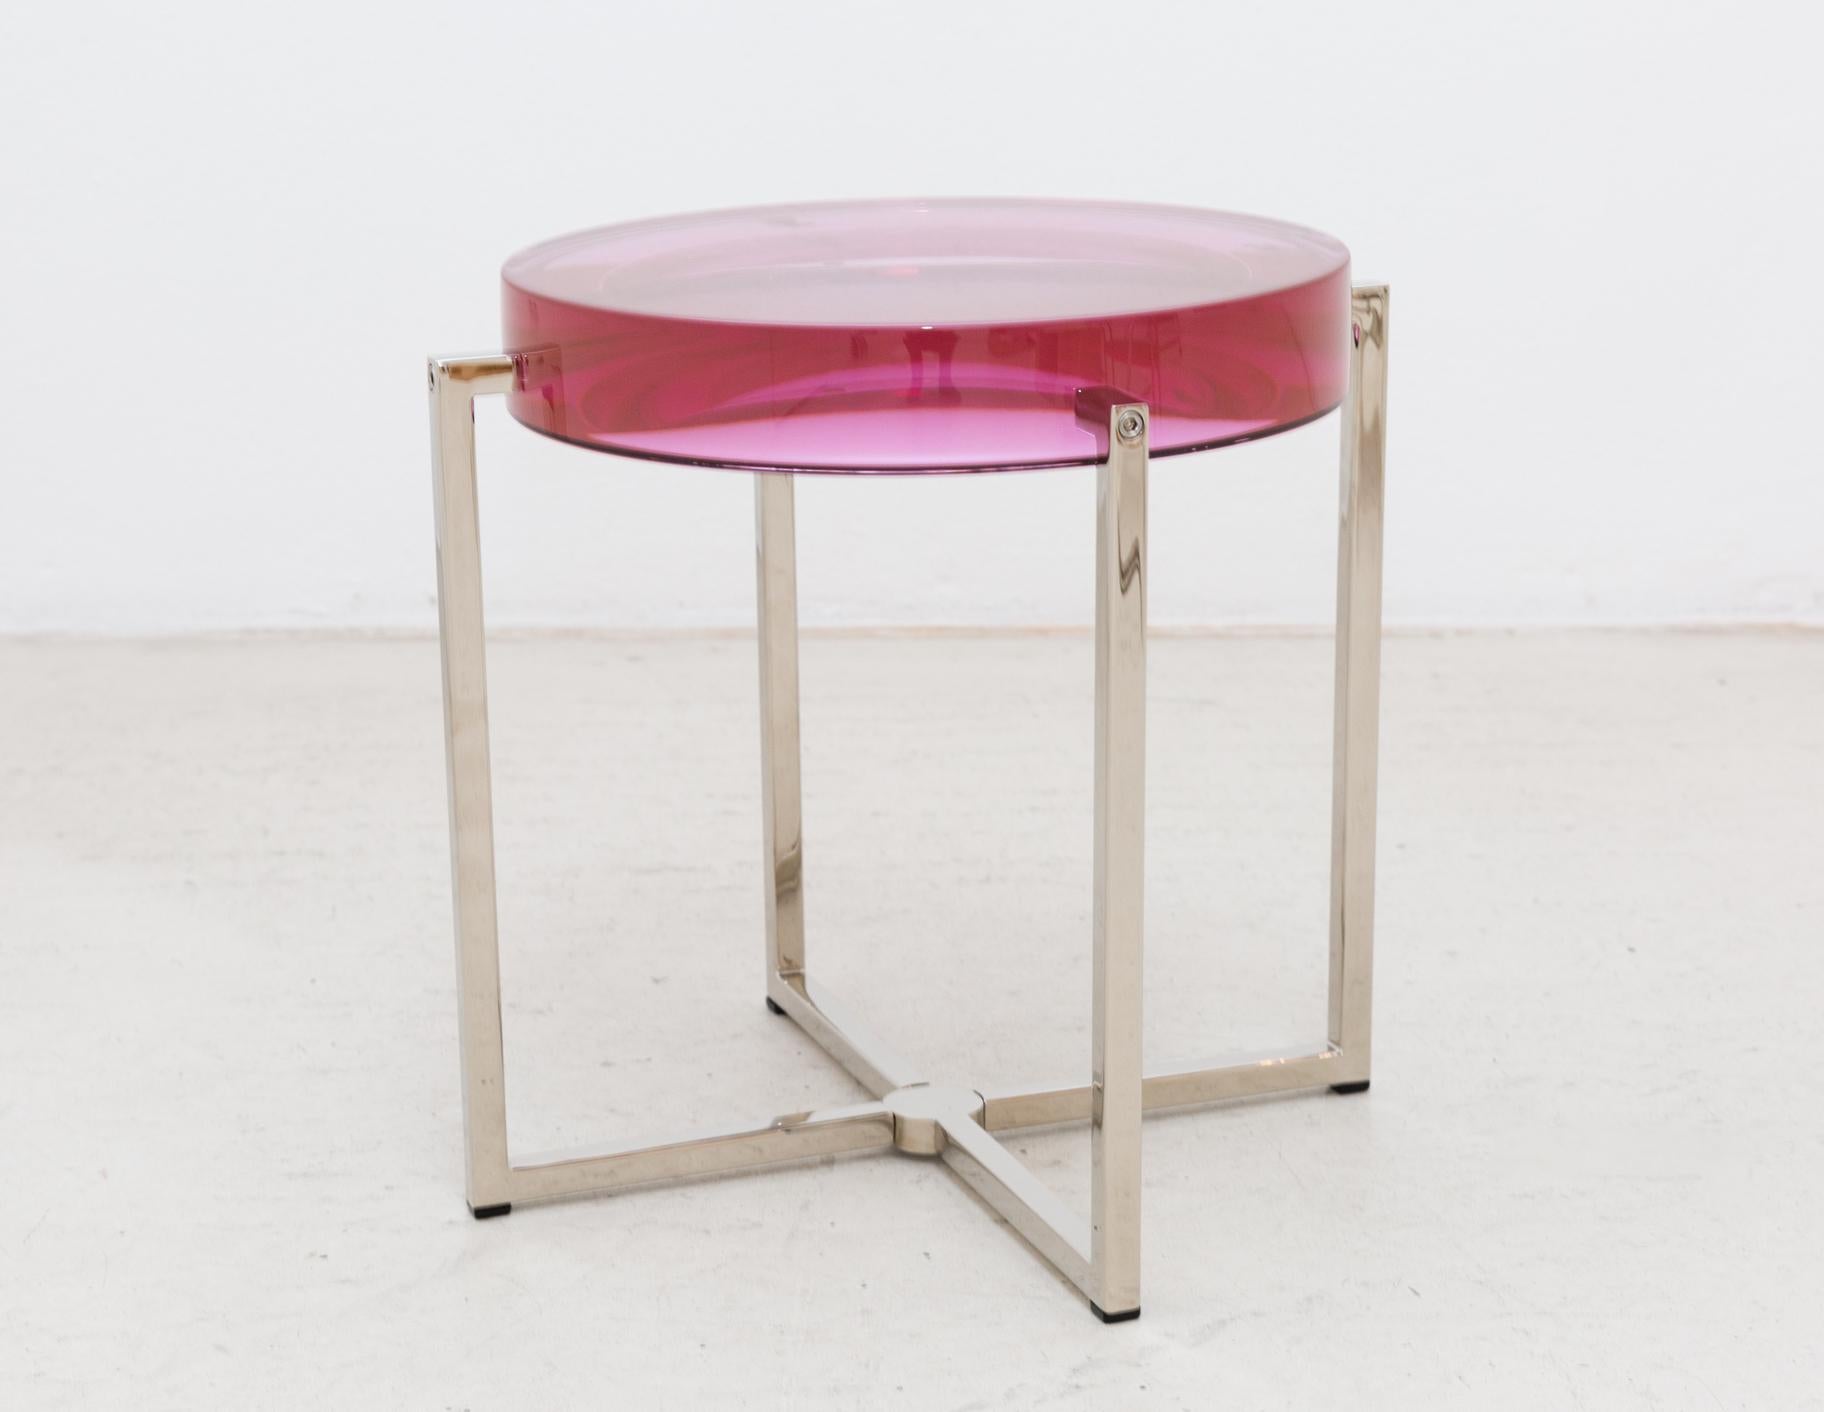 McCollin Bryan Lens table in bubble-gum pink. Resin top backed by acrylic mirror on nickel base with four legs.